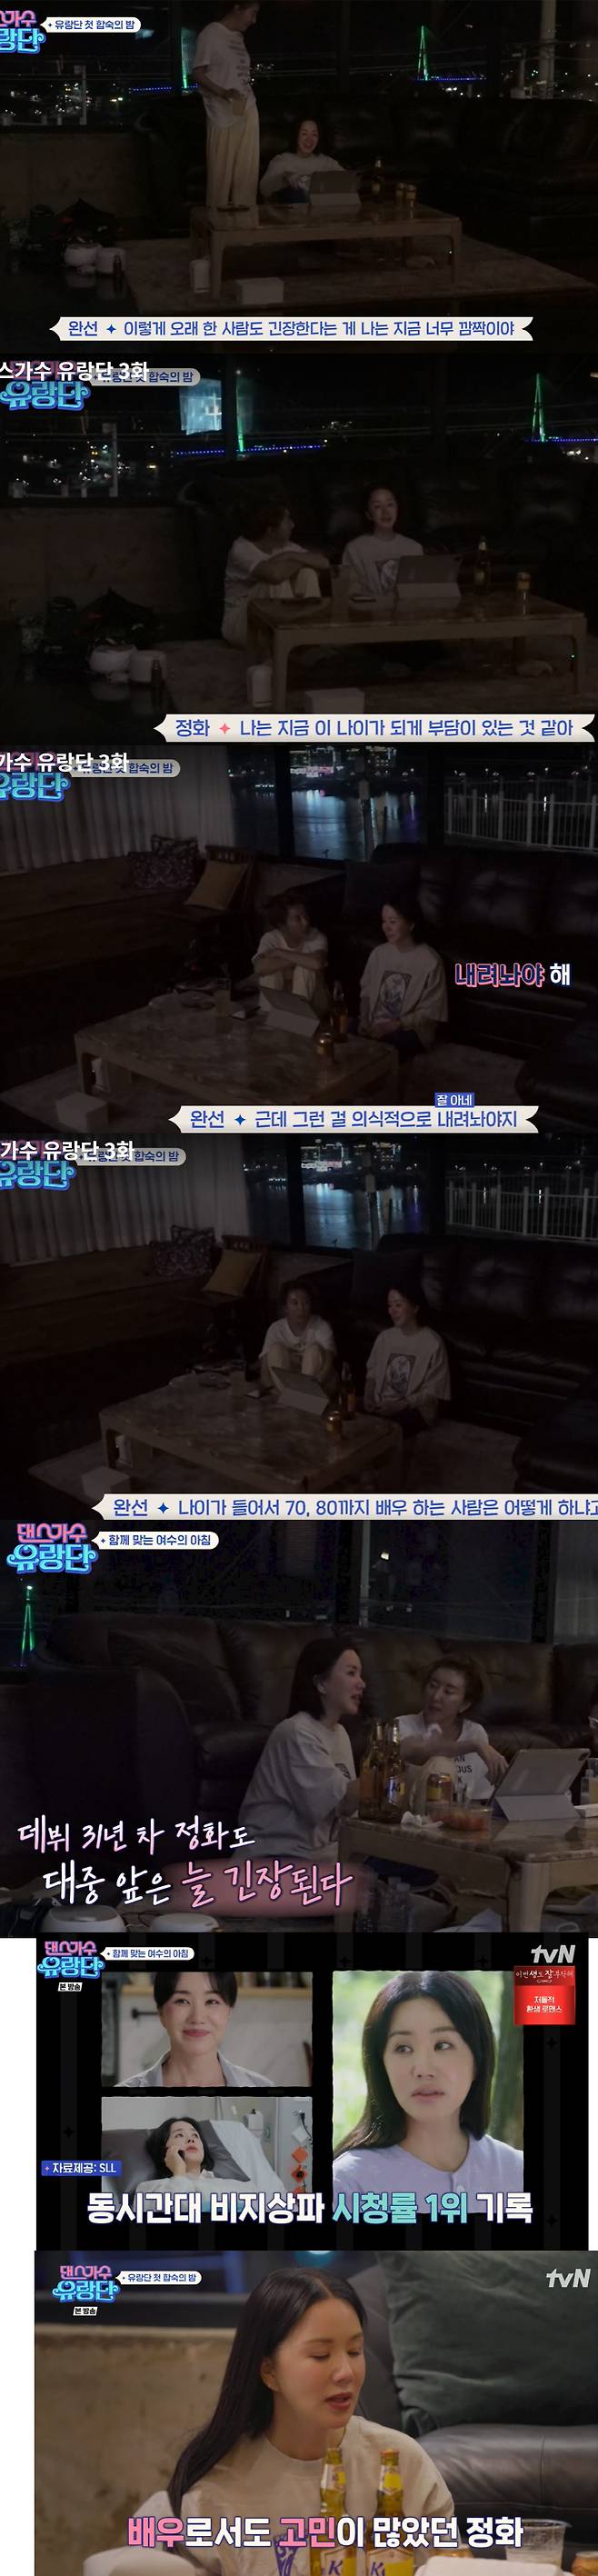 Singer and actor Uhm Jung-hwa shed tears as he expressed his nervousness ahead of the first broadcast of The Doctor Cha Jung-sook.Her tears were saddened by the burden of the celebritys life in the popularity of the public.In the TVN a dance troupe broadcasted on the 8th, Lee Hyori BOA Kim Wan-sun Hwasa Uhm Jung-hwas full-length road Mulch business trip event was spread.At the end of the twists and turns, the five ladies who arrived at the camp after finishing their own events filled the night with a genuine story.Uhm Jung-hwa, who overlapped with the first broadcast of Drama The Doctor Cha Jeong-sook starring a wandering party on the first event day, breathed in fear of viewer reaction.But I was so nervous that I ended up watching Drama with my sisters.Kim Wan-sun, a colleague, came up next to Uhm Jung-hwa, who watched the first broadcast alone in the living room after sleeping alone.Kim Wan-sun said, I am surprised that a person who has acted for 31 years is still trembling. Uhm Jung-hwa said, The more the year is accumulated, the more burdensome it is.But I like acting so much that I want to do more. Kim Wan-sun said, You have to put the burden down. Of course, you can do it. What about someone who learns by the age of 70 and 80?Hwasa and Hyori also came up and watched Uhm Jung-hwas The Doctor Cha Jung-sook together. Uhm Jung-hwa said, In fact,I thought that the actors life could be over. Members said, Is it our blues? He said, No, it was so much fun.Uhm Jung-hwas previous work, Drama, is a 50-episode drama with You Are Too Much, which was broadcast in 2017. It is a feature-length film with 19.4% TV viewer ratings.Uhm Jung-hwa, who woke up early the next day, laughed reassuringly. Watching the audiences favorable comments and high TV viewer ratings, he said, Hyori came first.The article came out well and the TV viewer ratings are the highest. Kim Wan-sun, who saw Uhm Jung-hwa crying for a while in a room without anyone, was worried that he was burdened by the lead role. Uhm Jung-hwa was relieved to say thank you to himself.The production team of a wandering party explained Uhm Jung-hwas tension and tears with the subtitle Life of an entertainer who lives with the love of the public but can not be free from evaluation as much as he is loved.Kim Tae-ho PD revealed the back of Uhm Jung-hwas camera and said, Ive been having a hard time doing this. Please go out well.After that, I was worried about the first night of Cha Jung-sook, People should like it .. What if the smoke is what it is? Uhm Jung-hwa said, Should I have renewed it? I was worried that it was too soft.Kim Wan-sun cheered, Im 100 percent good. Im awesome in and of itself.Uhm Jung-hwa said, This drama Cha Jung-sook was a healing while shooting.Uhm Jung-hwa is an all-around entertainer who proved to be a Doctor Cha Jung-sook and Madonna of Korea.It was a hot response to the drama category for the fifth consecutive week, perfecting the character of Cha Jeong-suk, which gives women empathy.